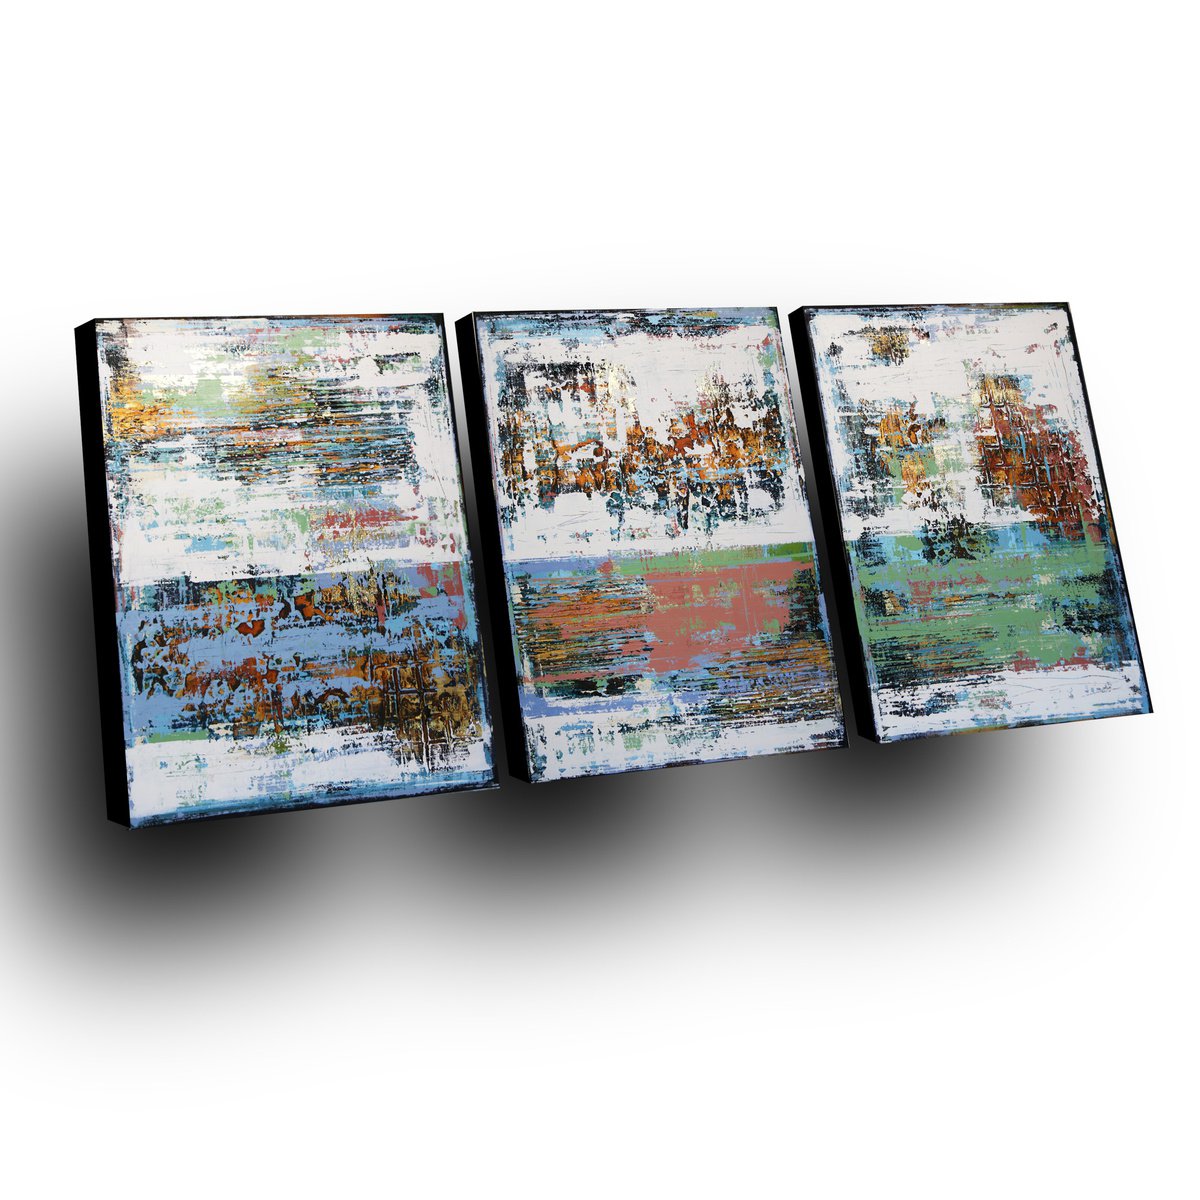 COLD MORNING * 180 x 80 cms - ABSTRACT PAINTING *** READY TO HANG *** TRIPTYCH by Inez Froehlich